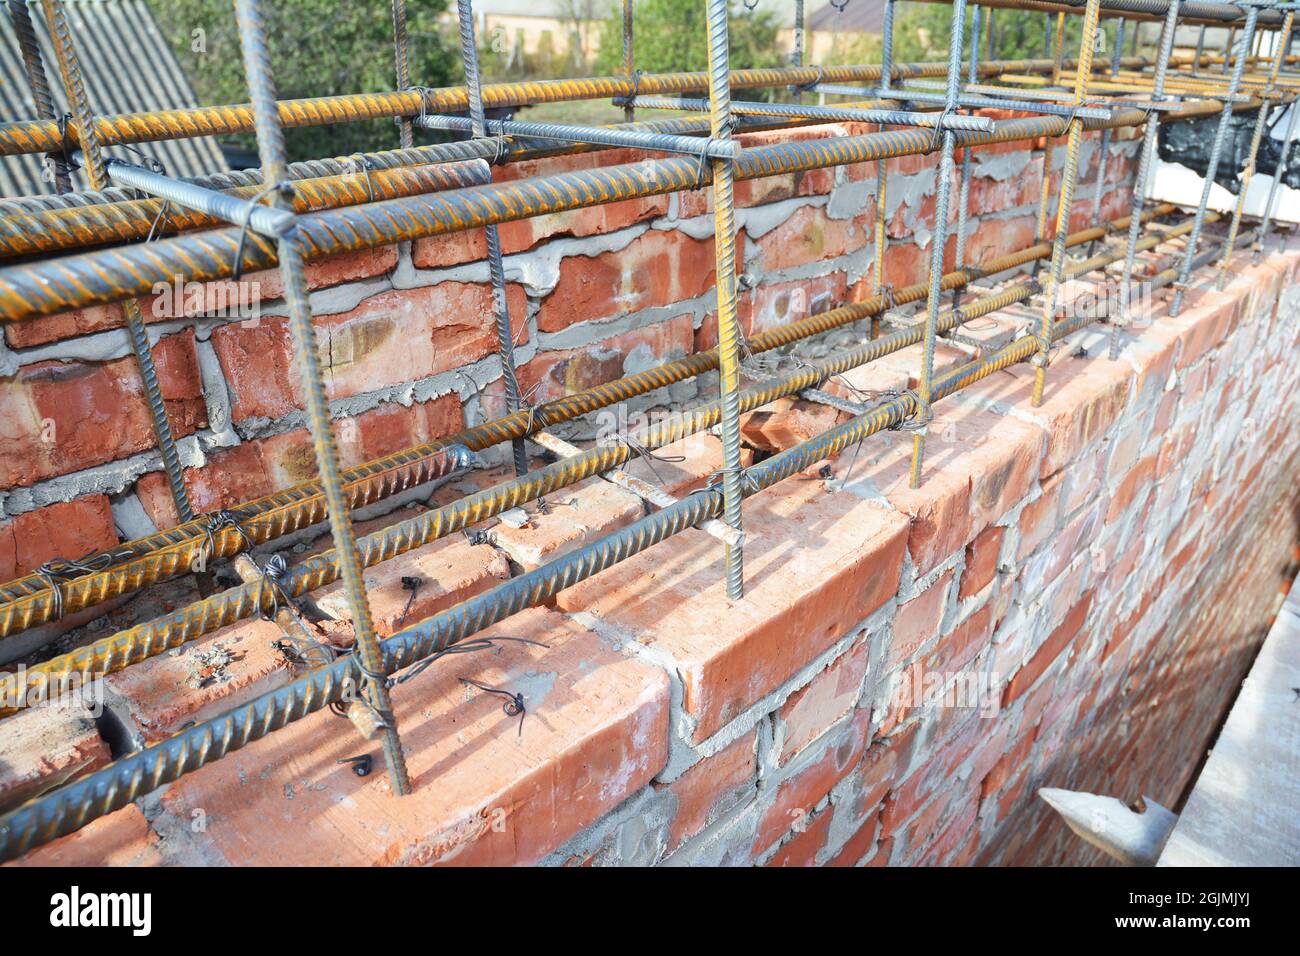 Reinforcement corner concrete bars with wire rod. Brickwork with Iron Bars for House Construction. Stock Photo